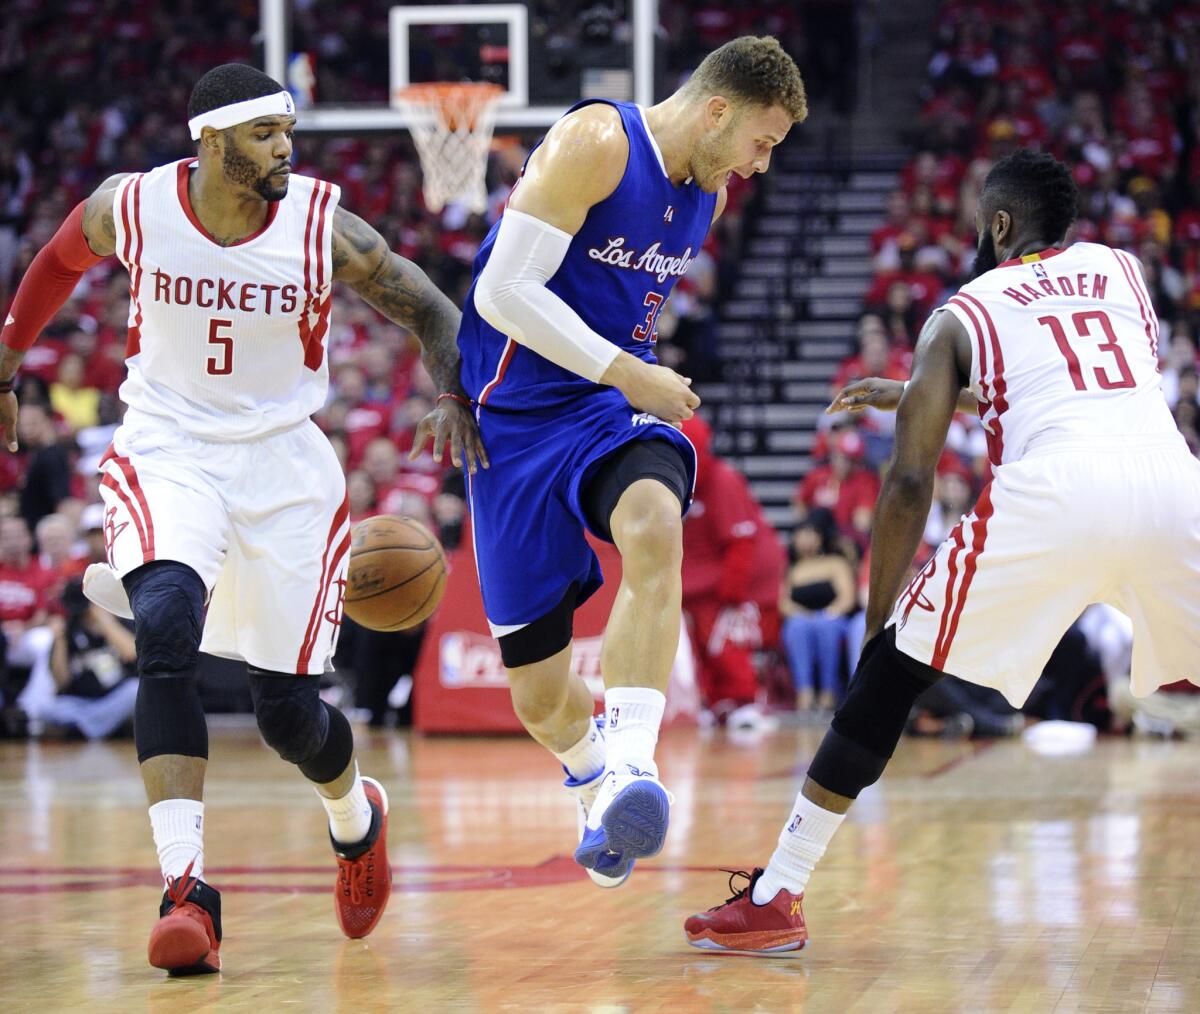 Clippers forward Blake Griffin has the ball knocked away by Rockets guard James Harden (13) while bringing it up court in Game 2.